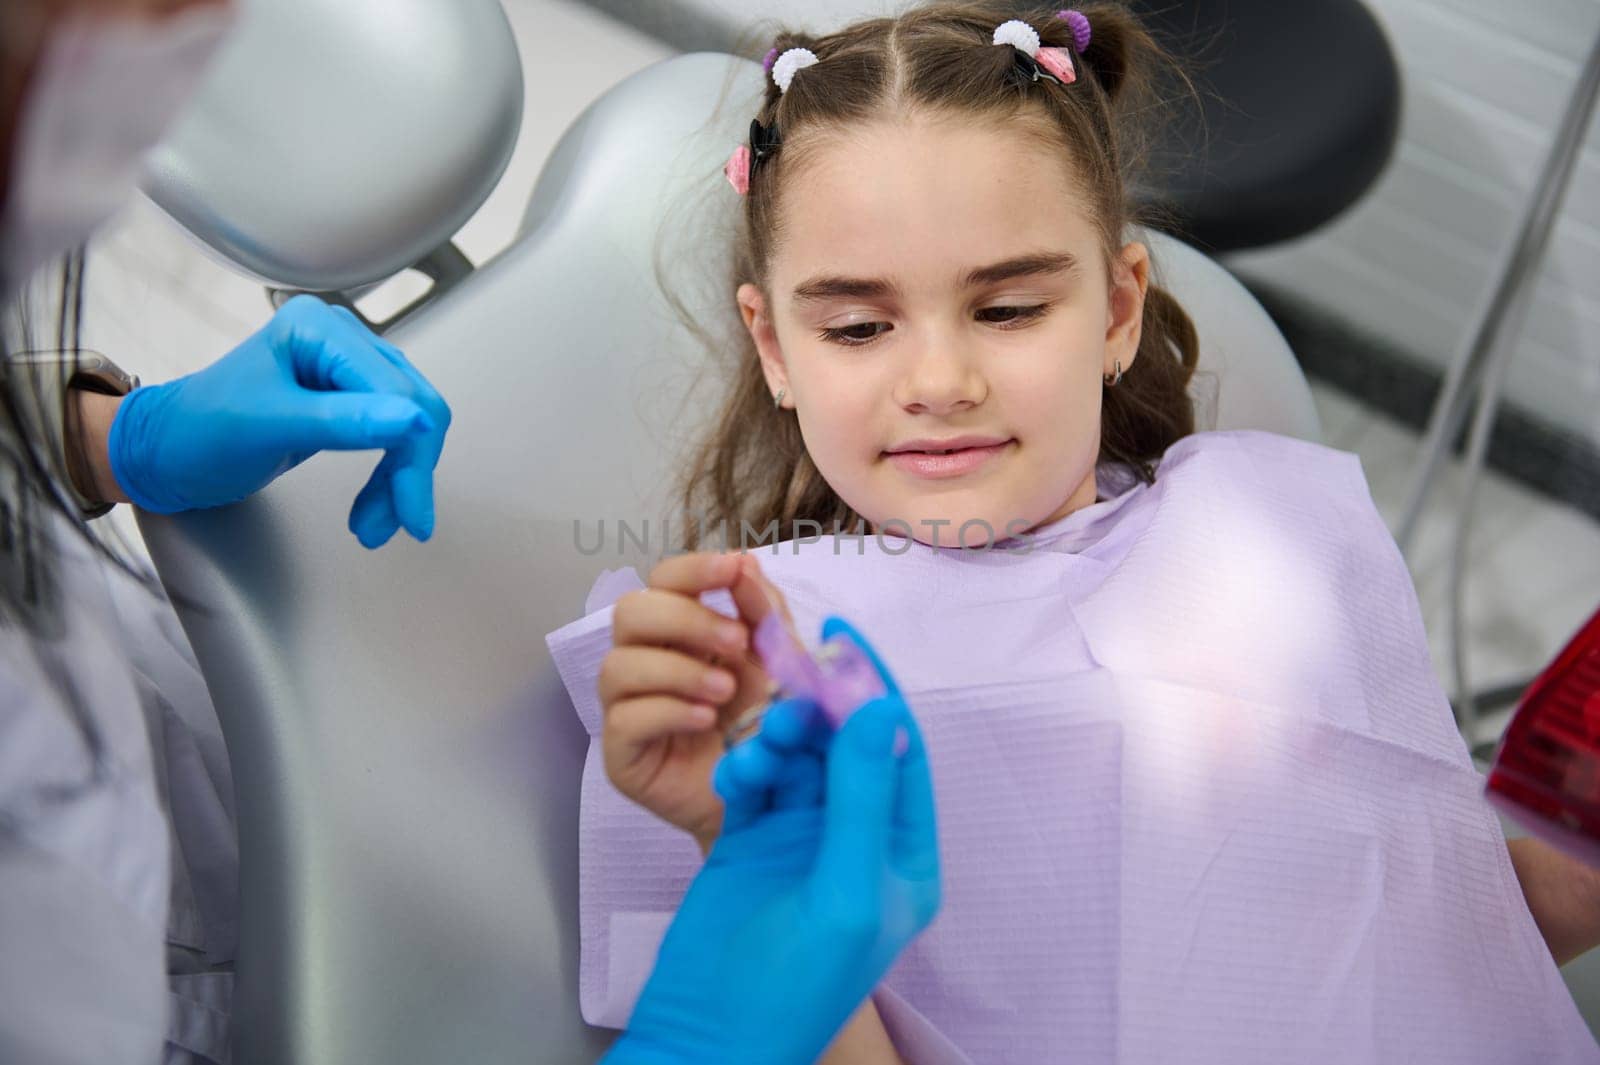 Close-up portrait of a little child girl at dentist's appointment, holding dental floss. Dental care and hygiene concept by artgf